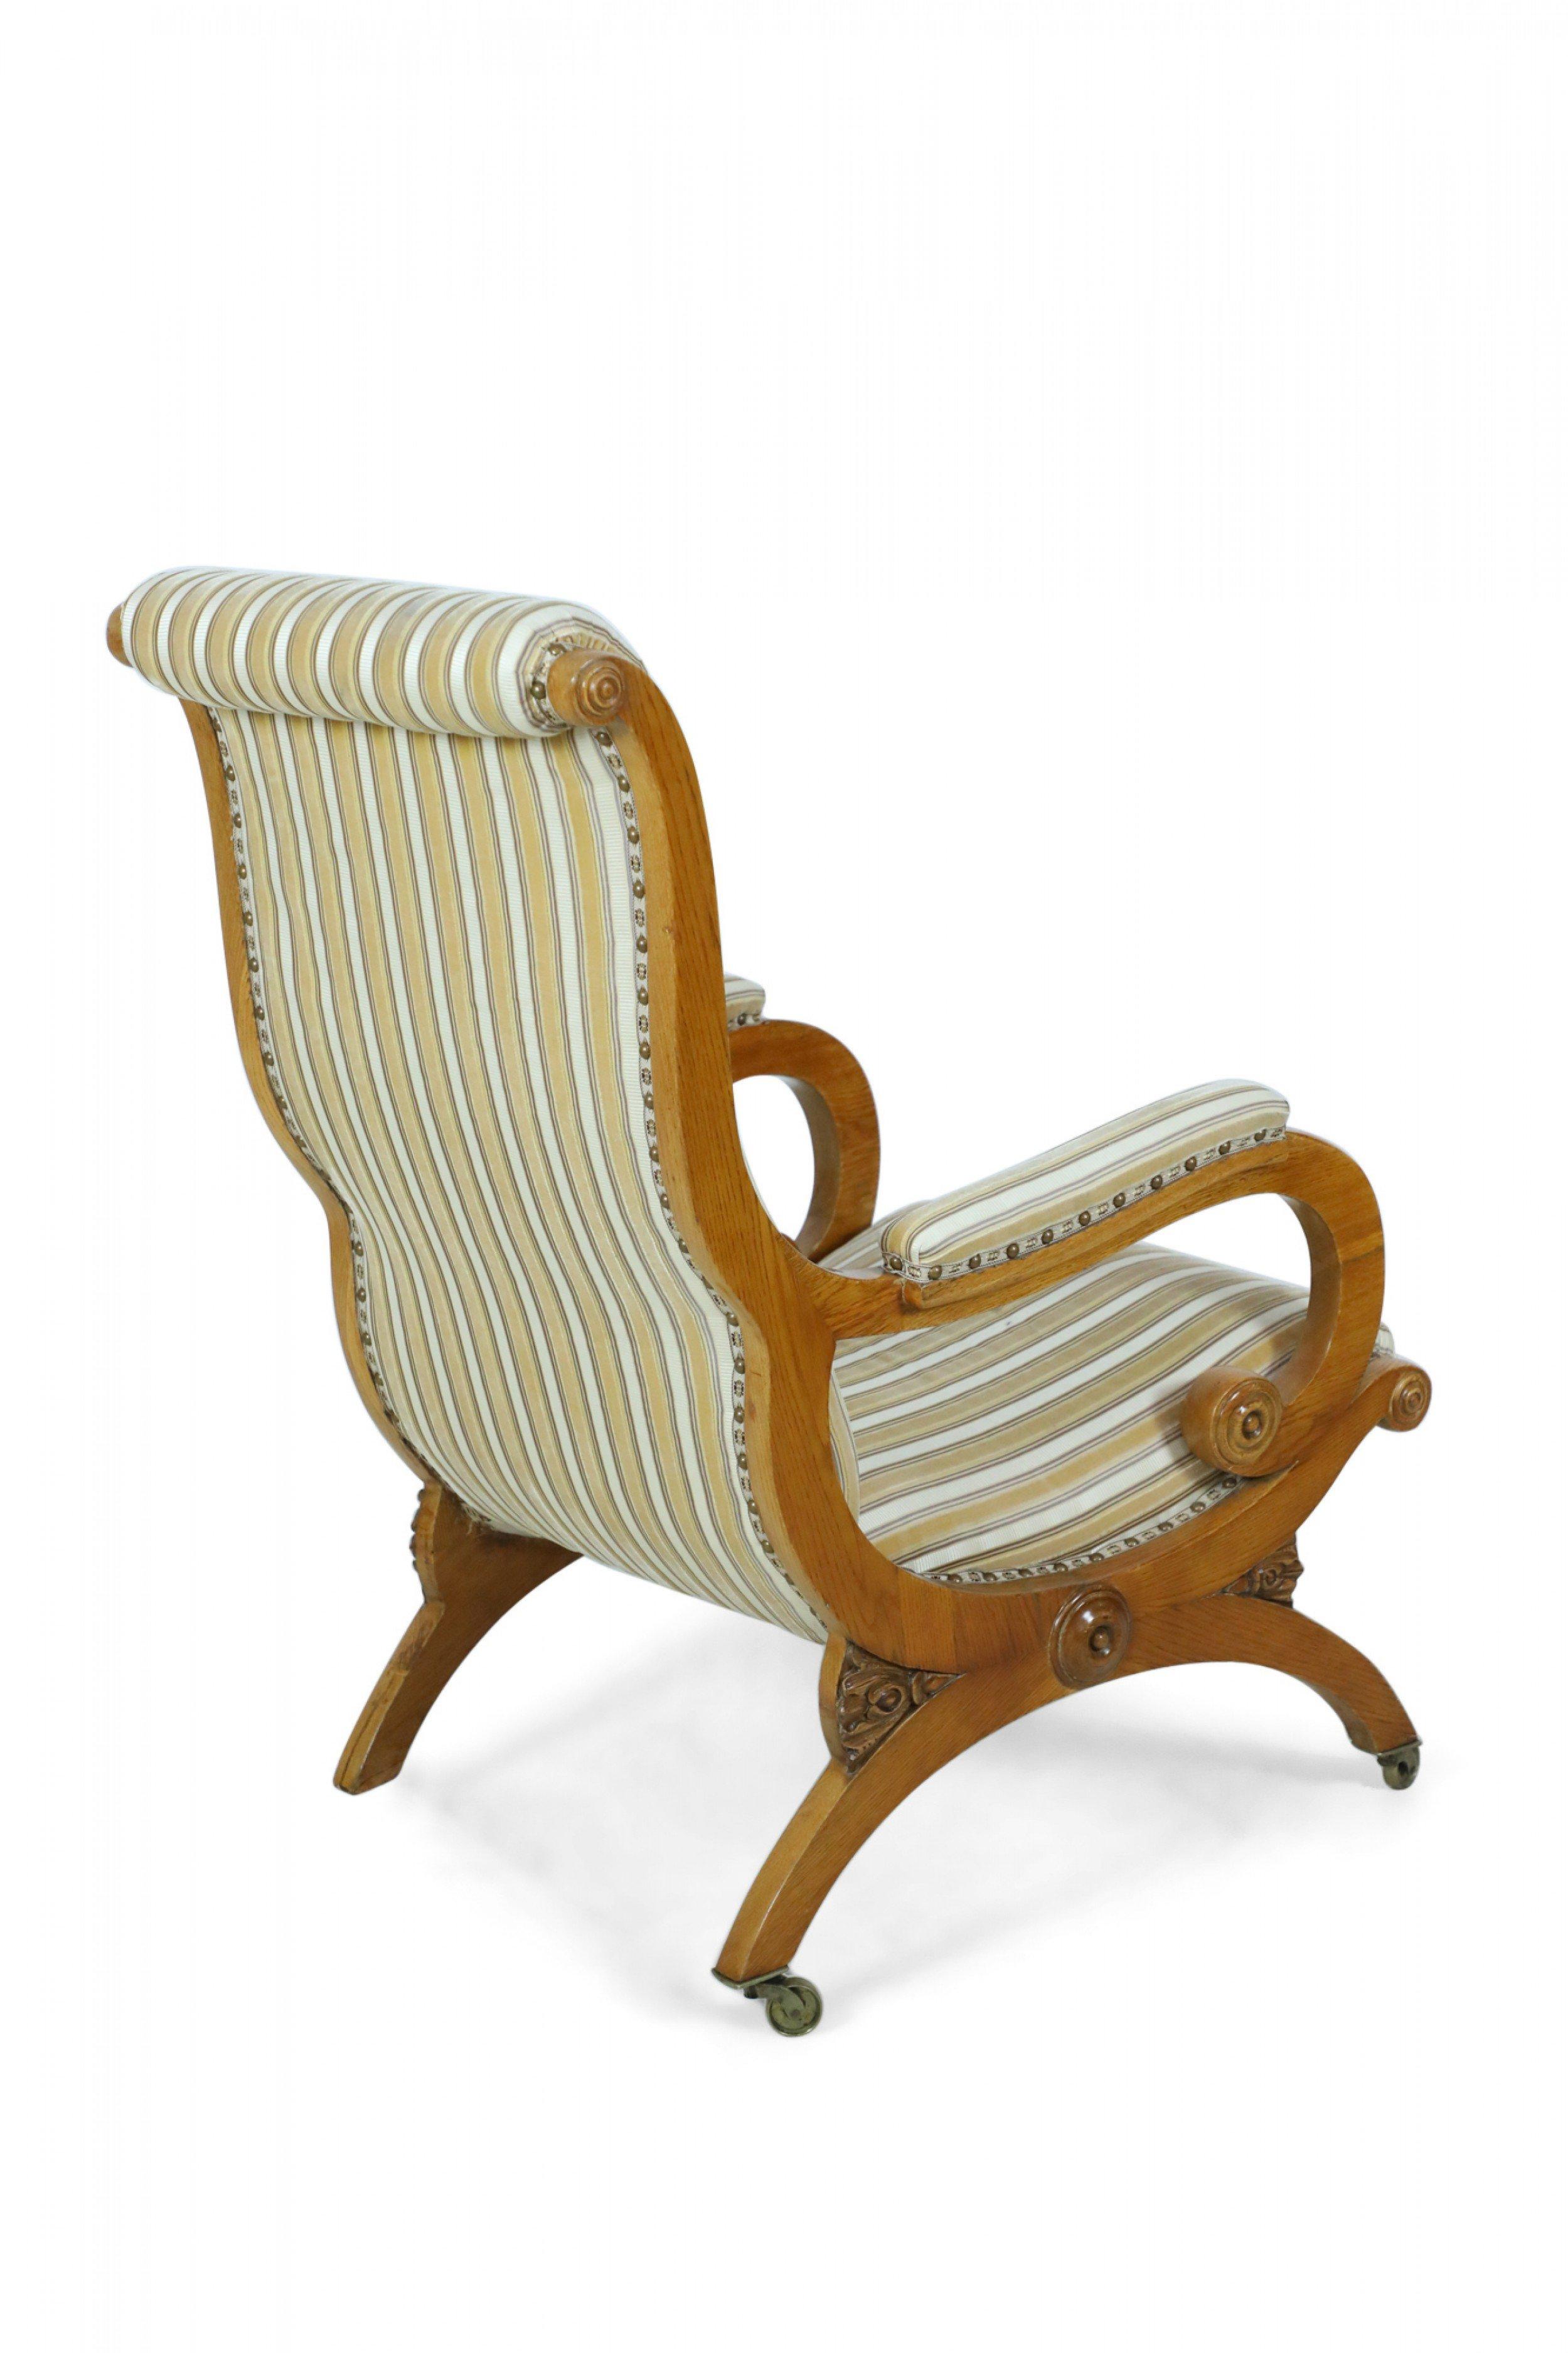 English Victorian Blond Wood Scroll Armchair with Striped Upholstery For Sale 4